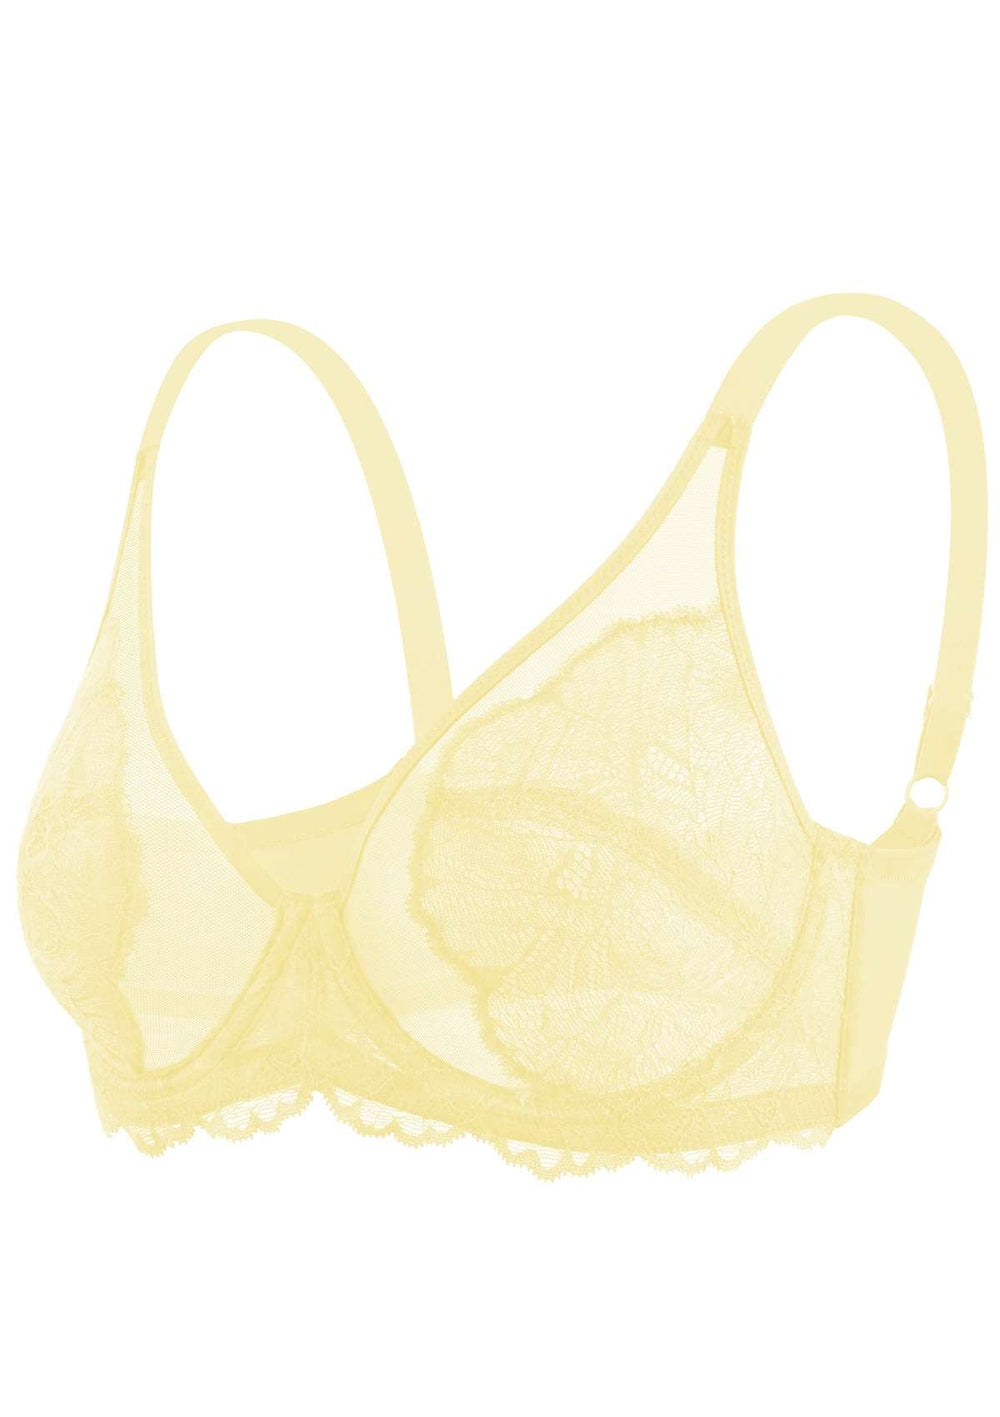 Buy A-GG Yellow Recycled Lace Full Cup Non Padded Bra - 34A, Bras